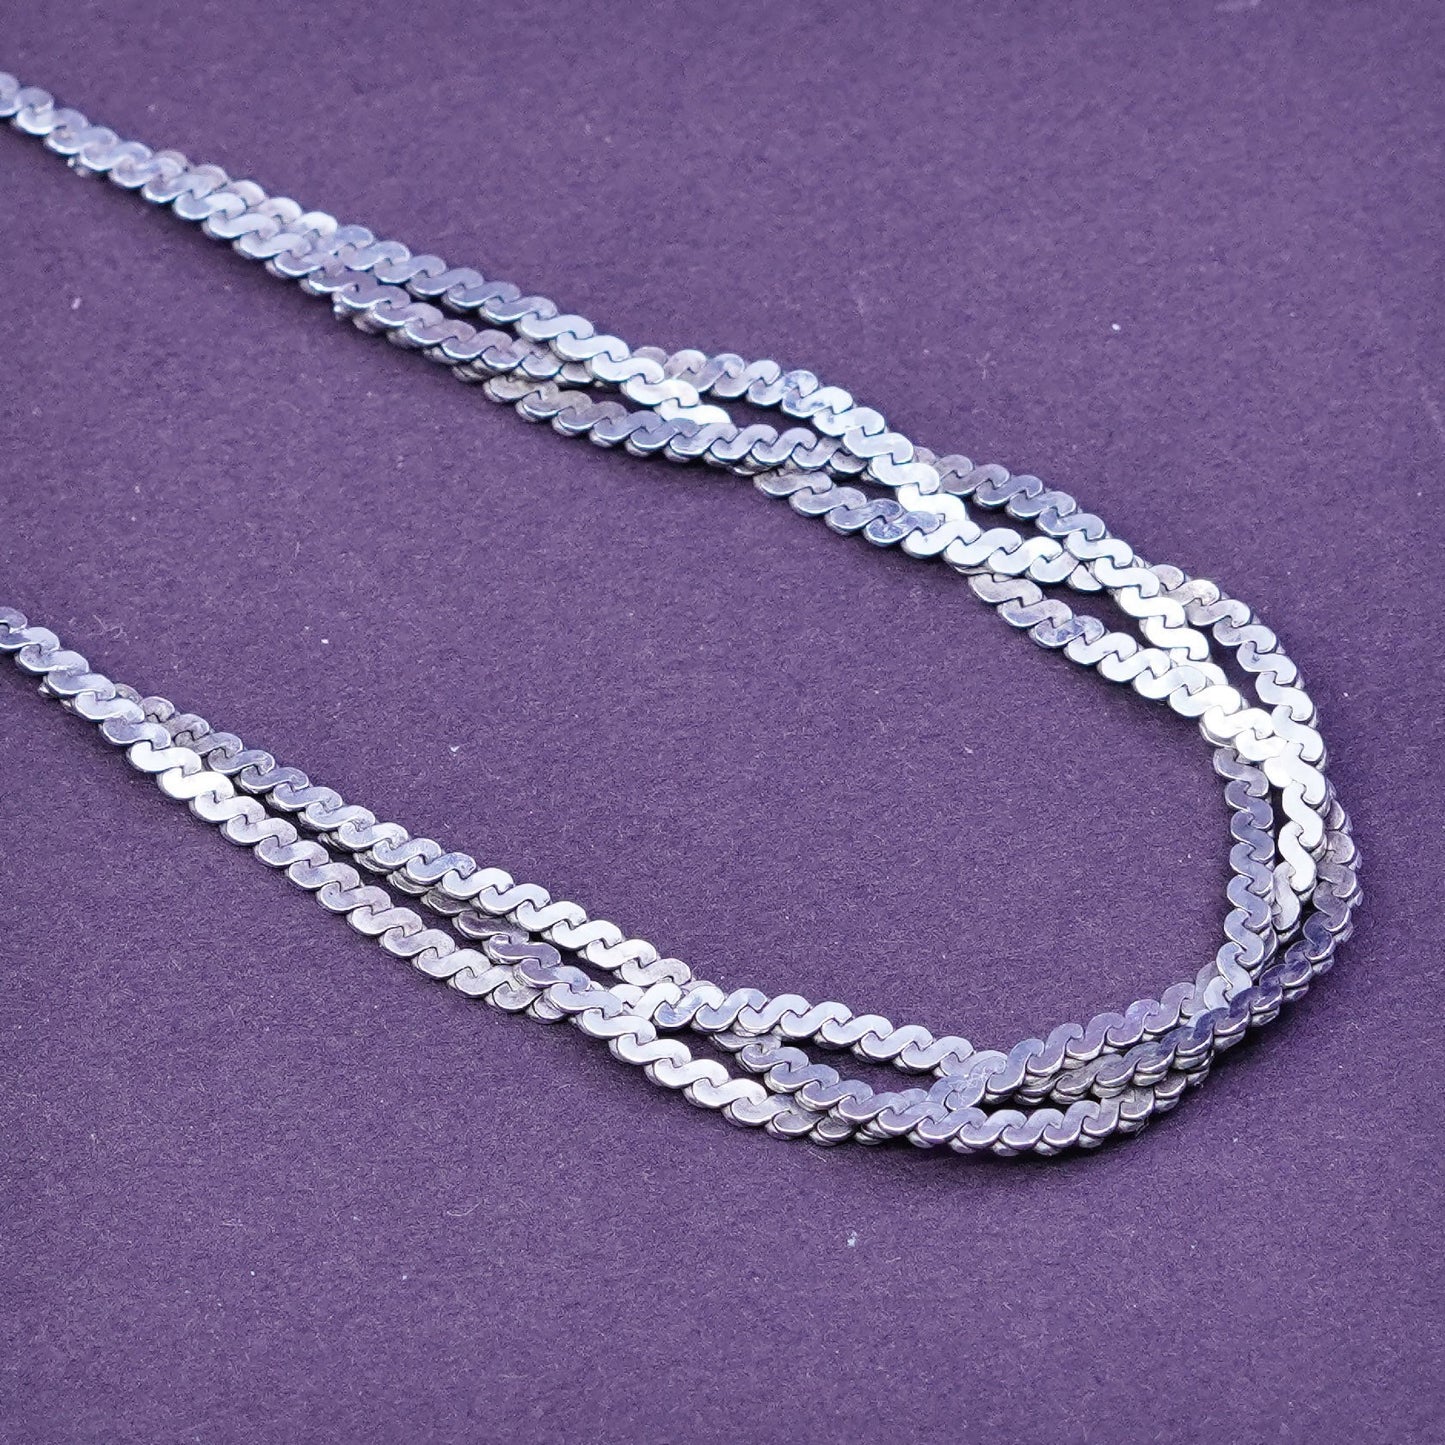 18”, vtg Sterling silver necklace, solid Italy 925 silver S-link woven chain